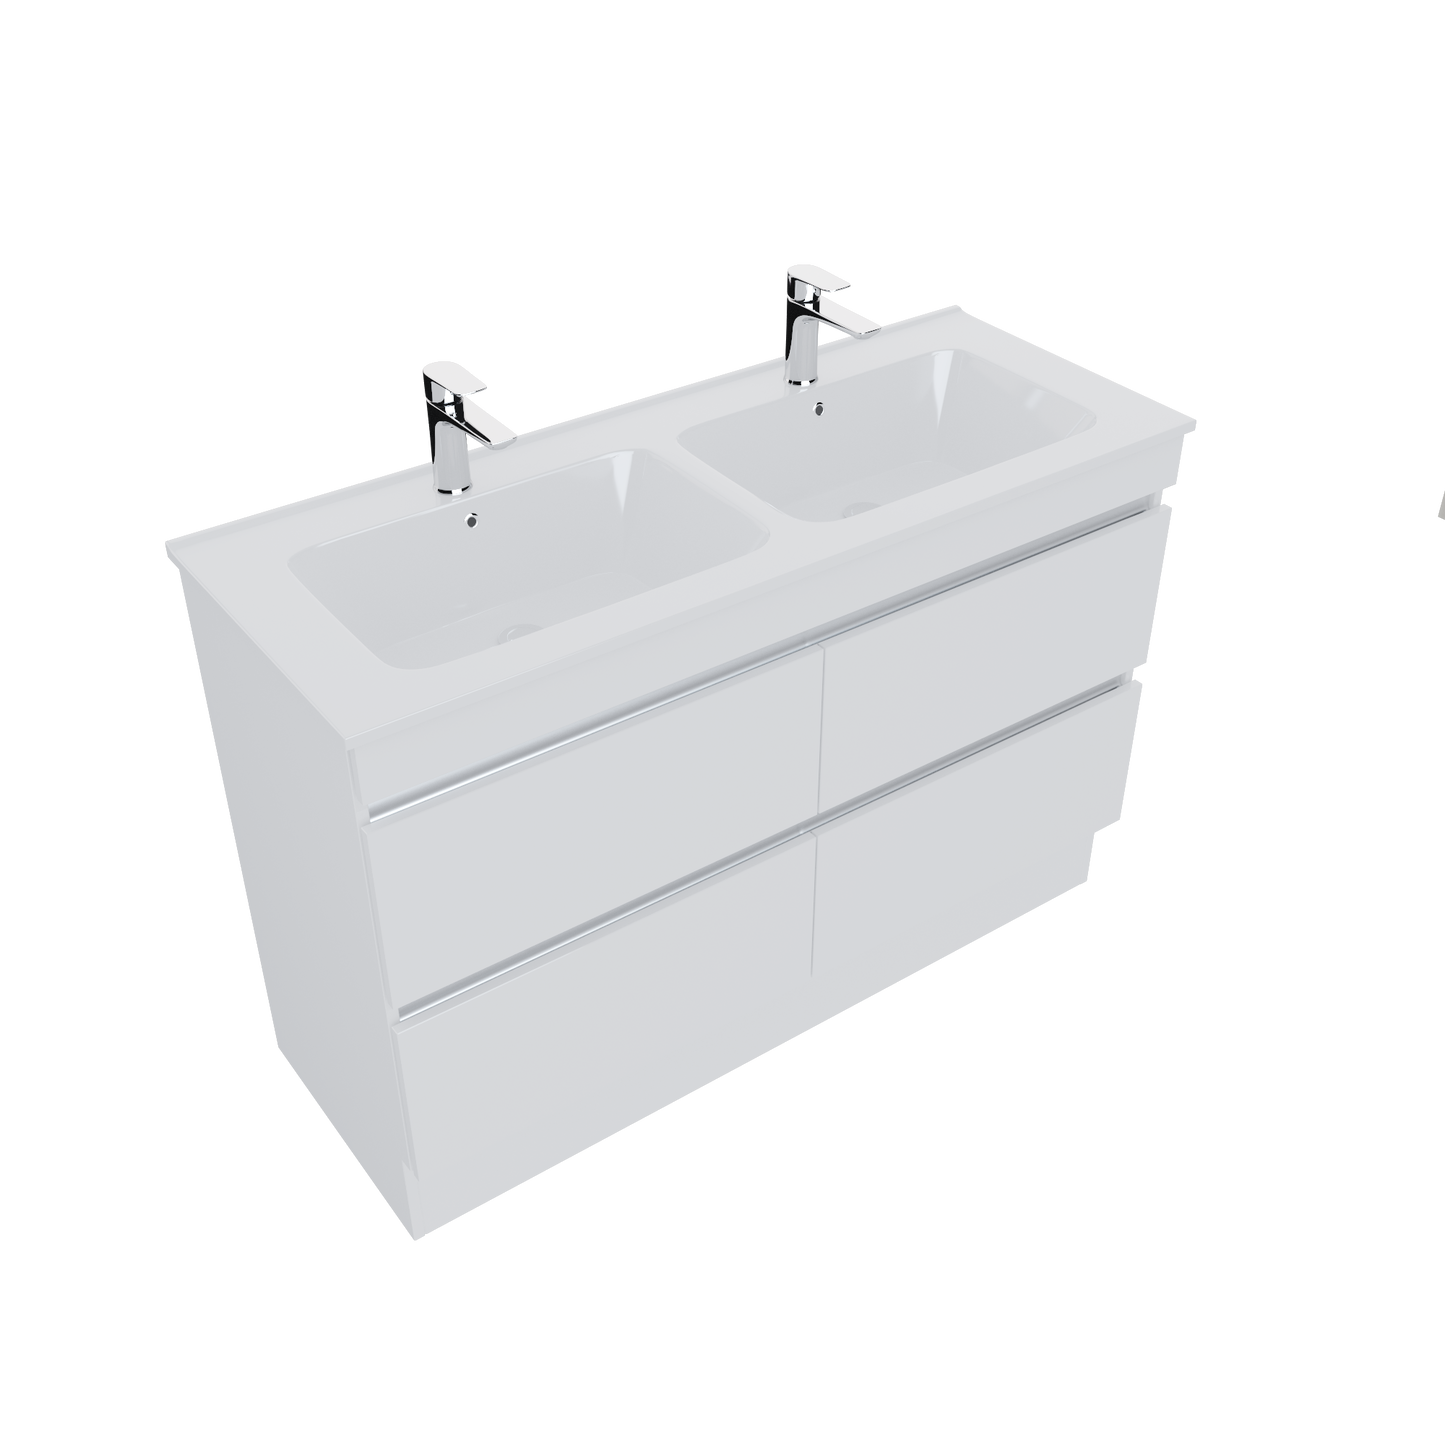 Newtech Brookfield 1200 Floorstanding 4 Drawer Double Basin Vanity in Gloss White with Delgado Stonecast Double basin